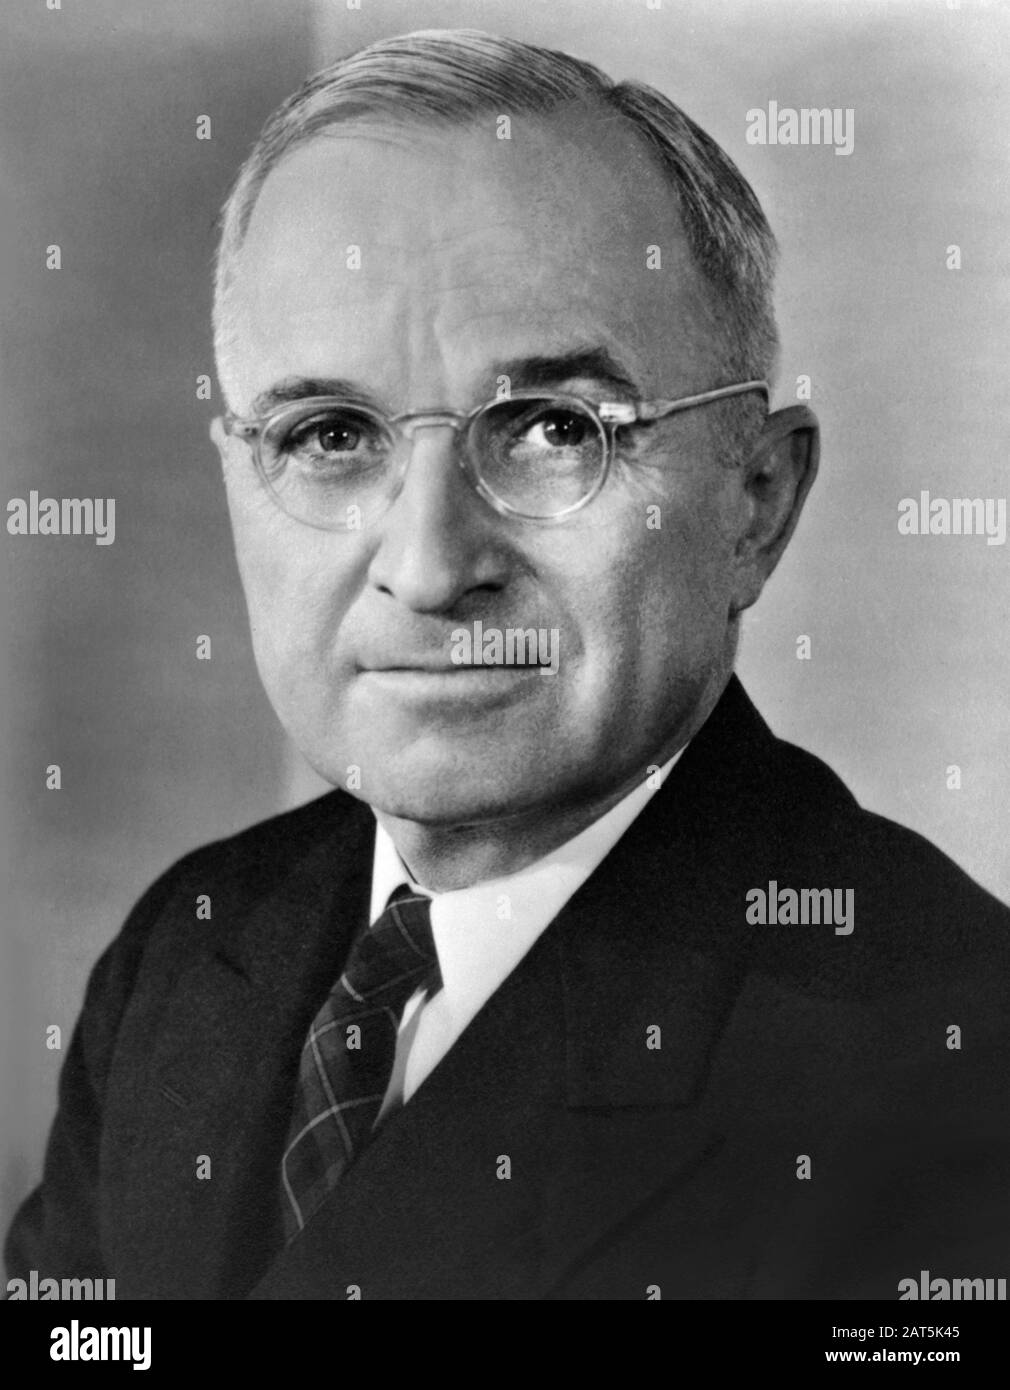 Harry S. Truman (1884-1972), 33rd President of the United States, 1945-1953, Head and Shoulders Portrait, 1945 Stock Photo